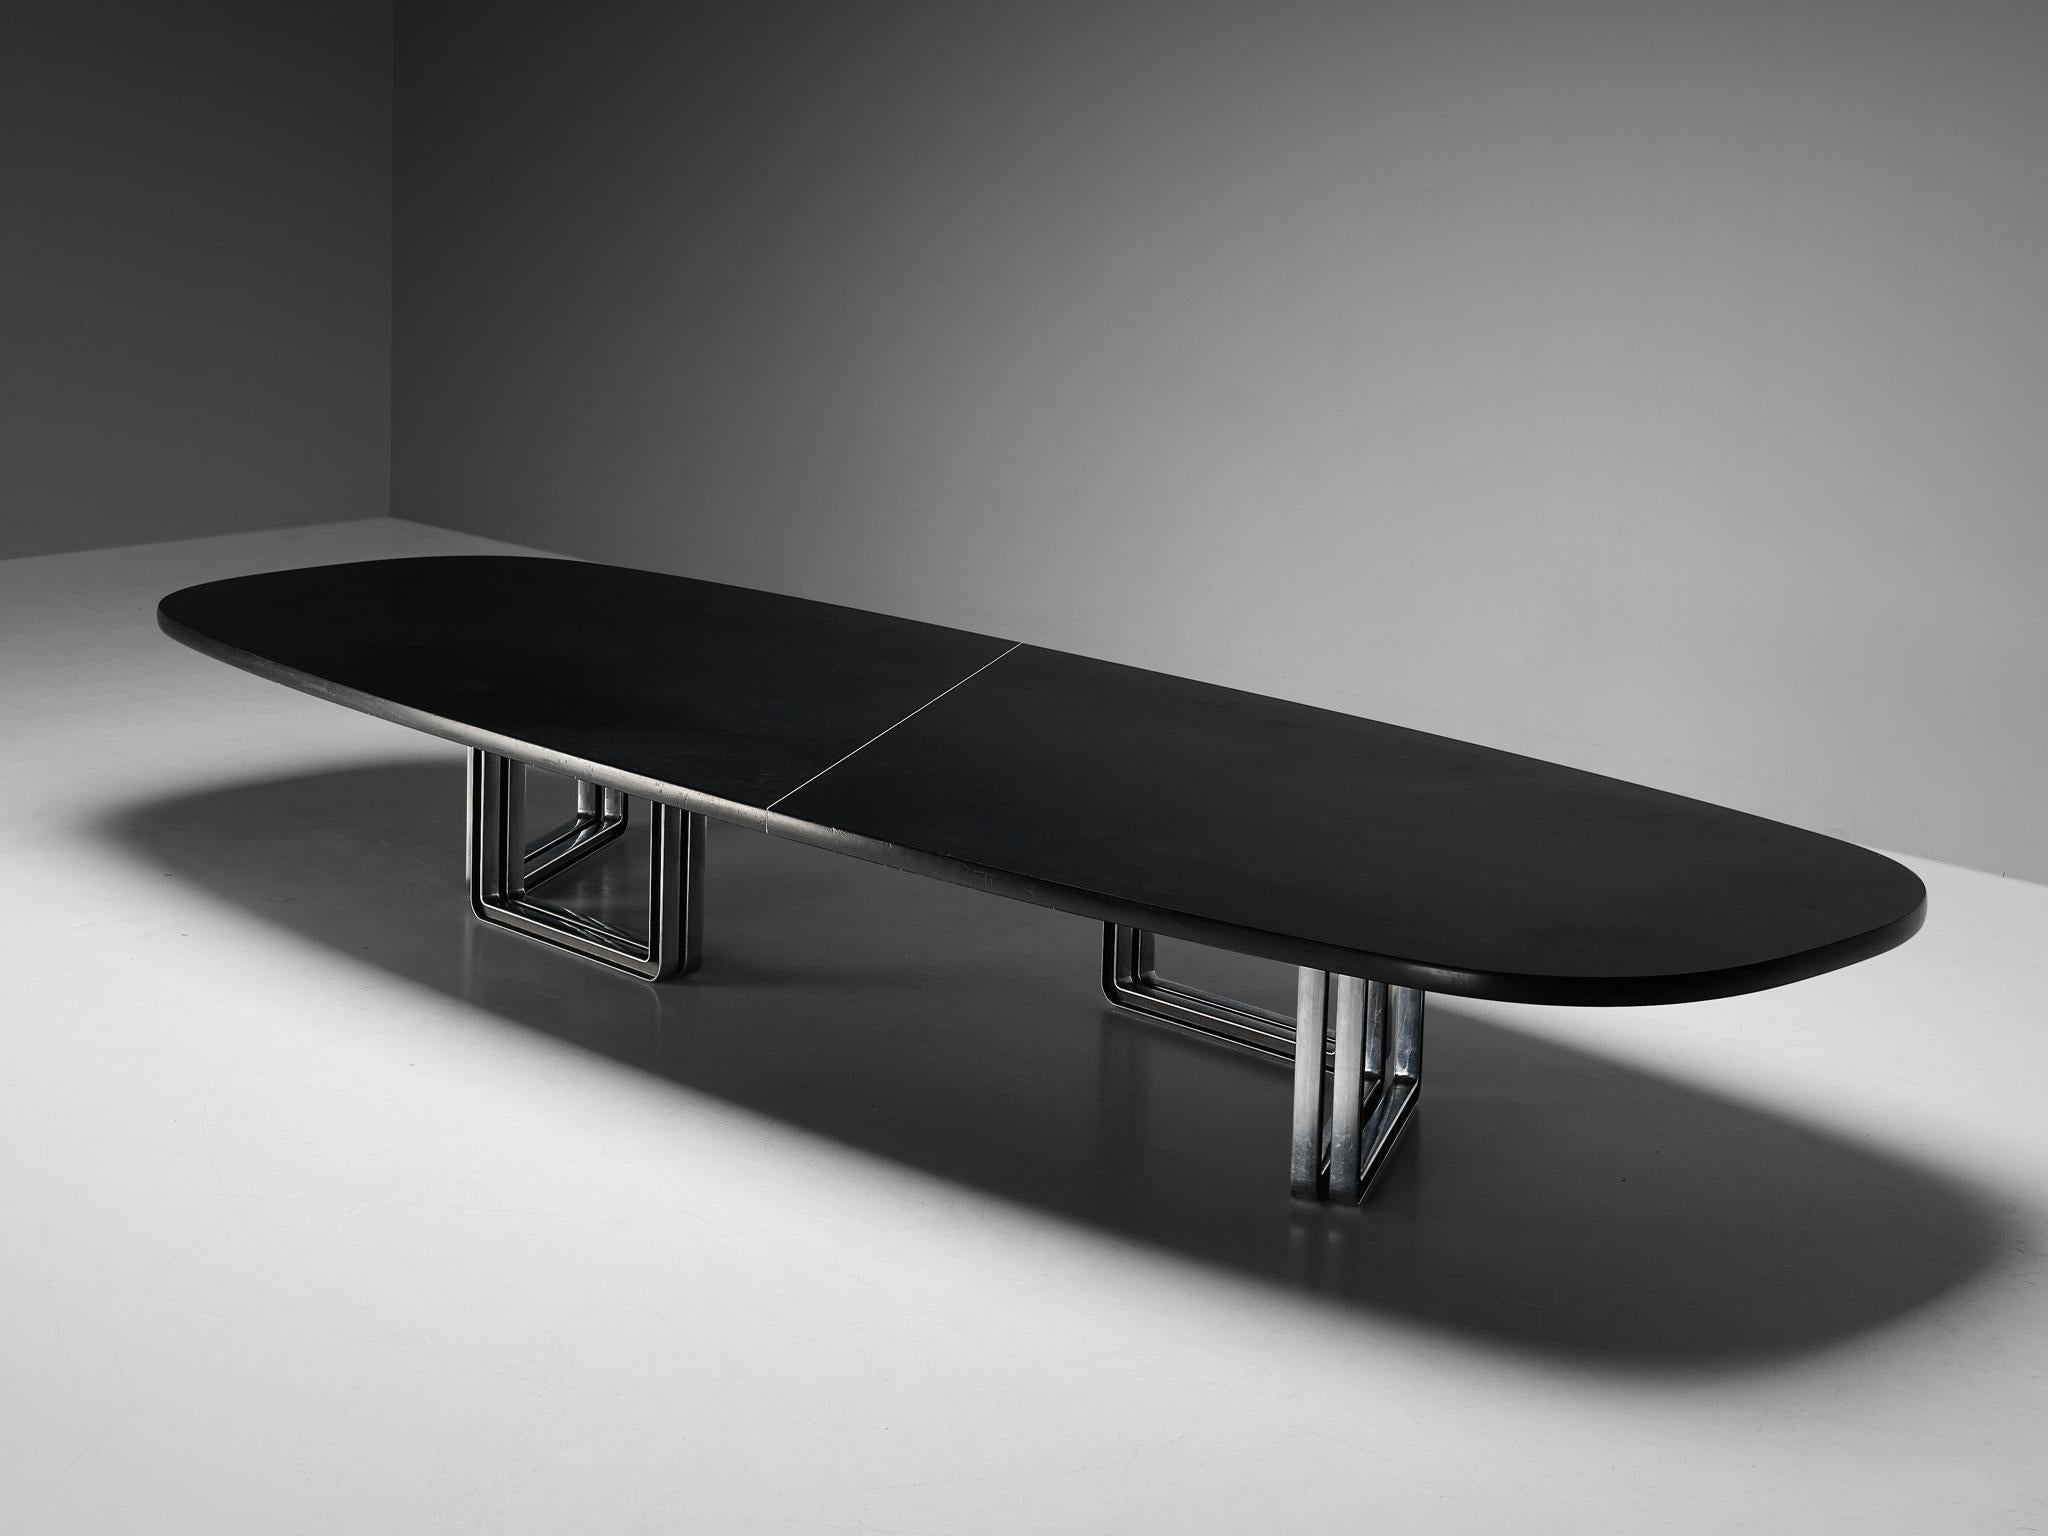 Centro Progetti Tecno, conference table model 'T335', lacquered wood, aluminum, Italy, 1975-1978

Large conference table with a black lacquered wooden top that has an incredibly soft texture. The table is composed of two parts that are visually